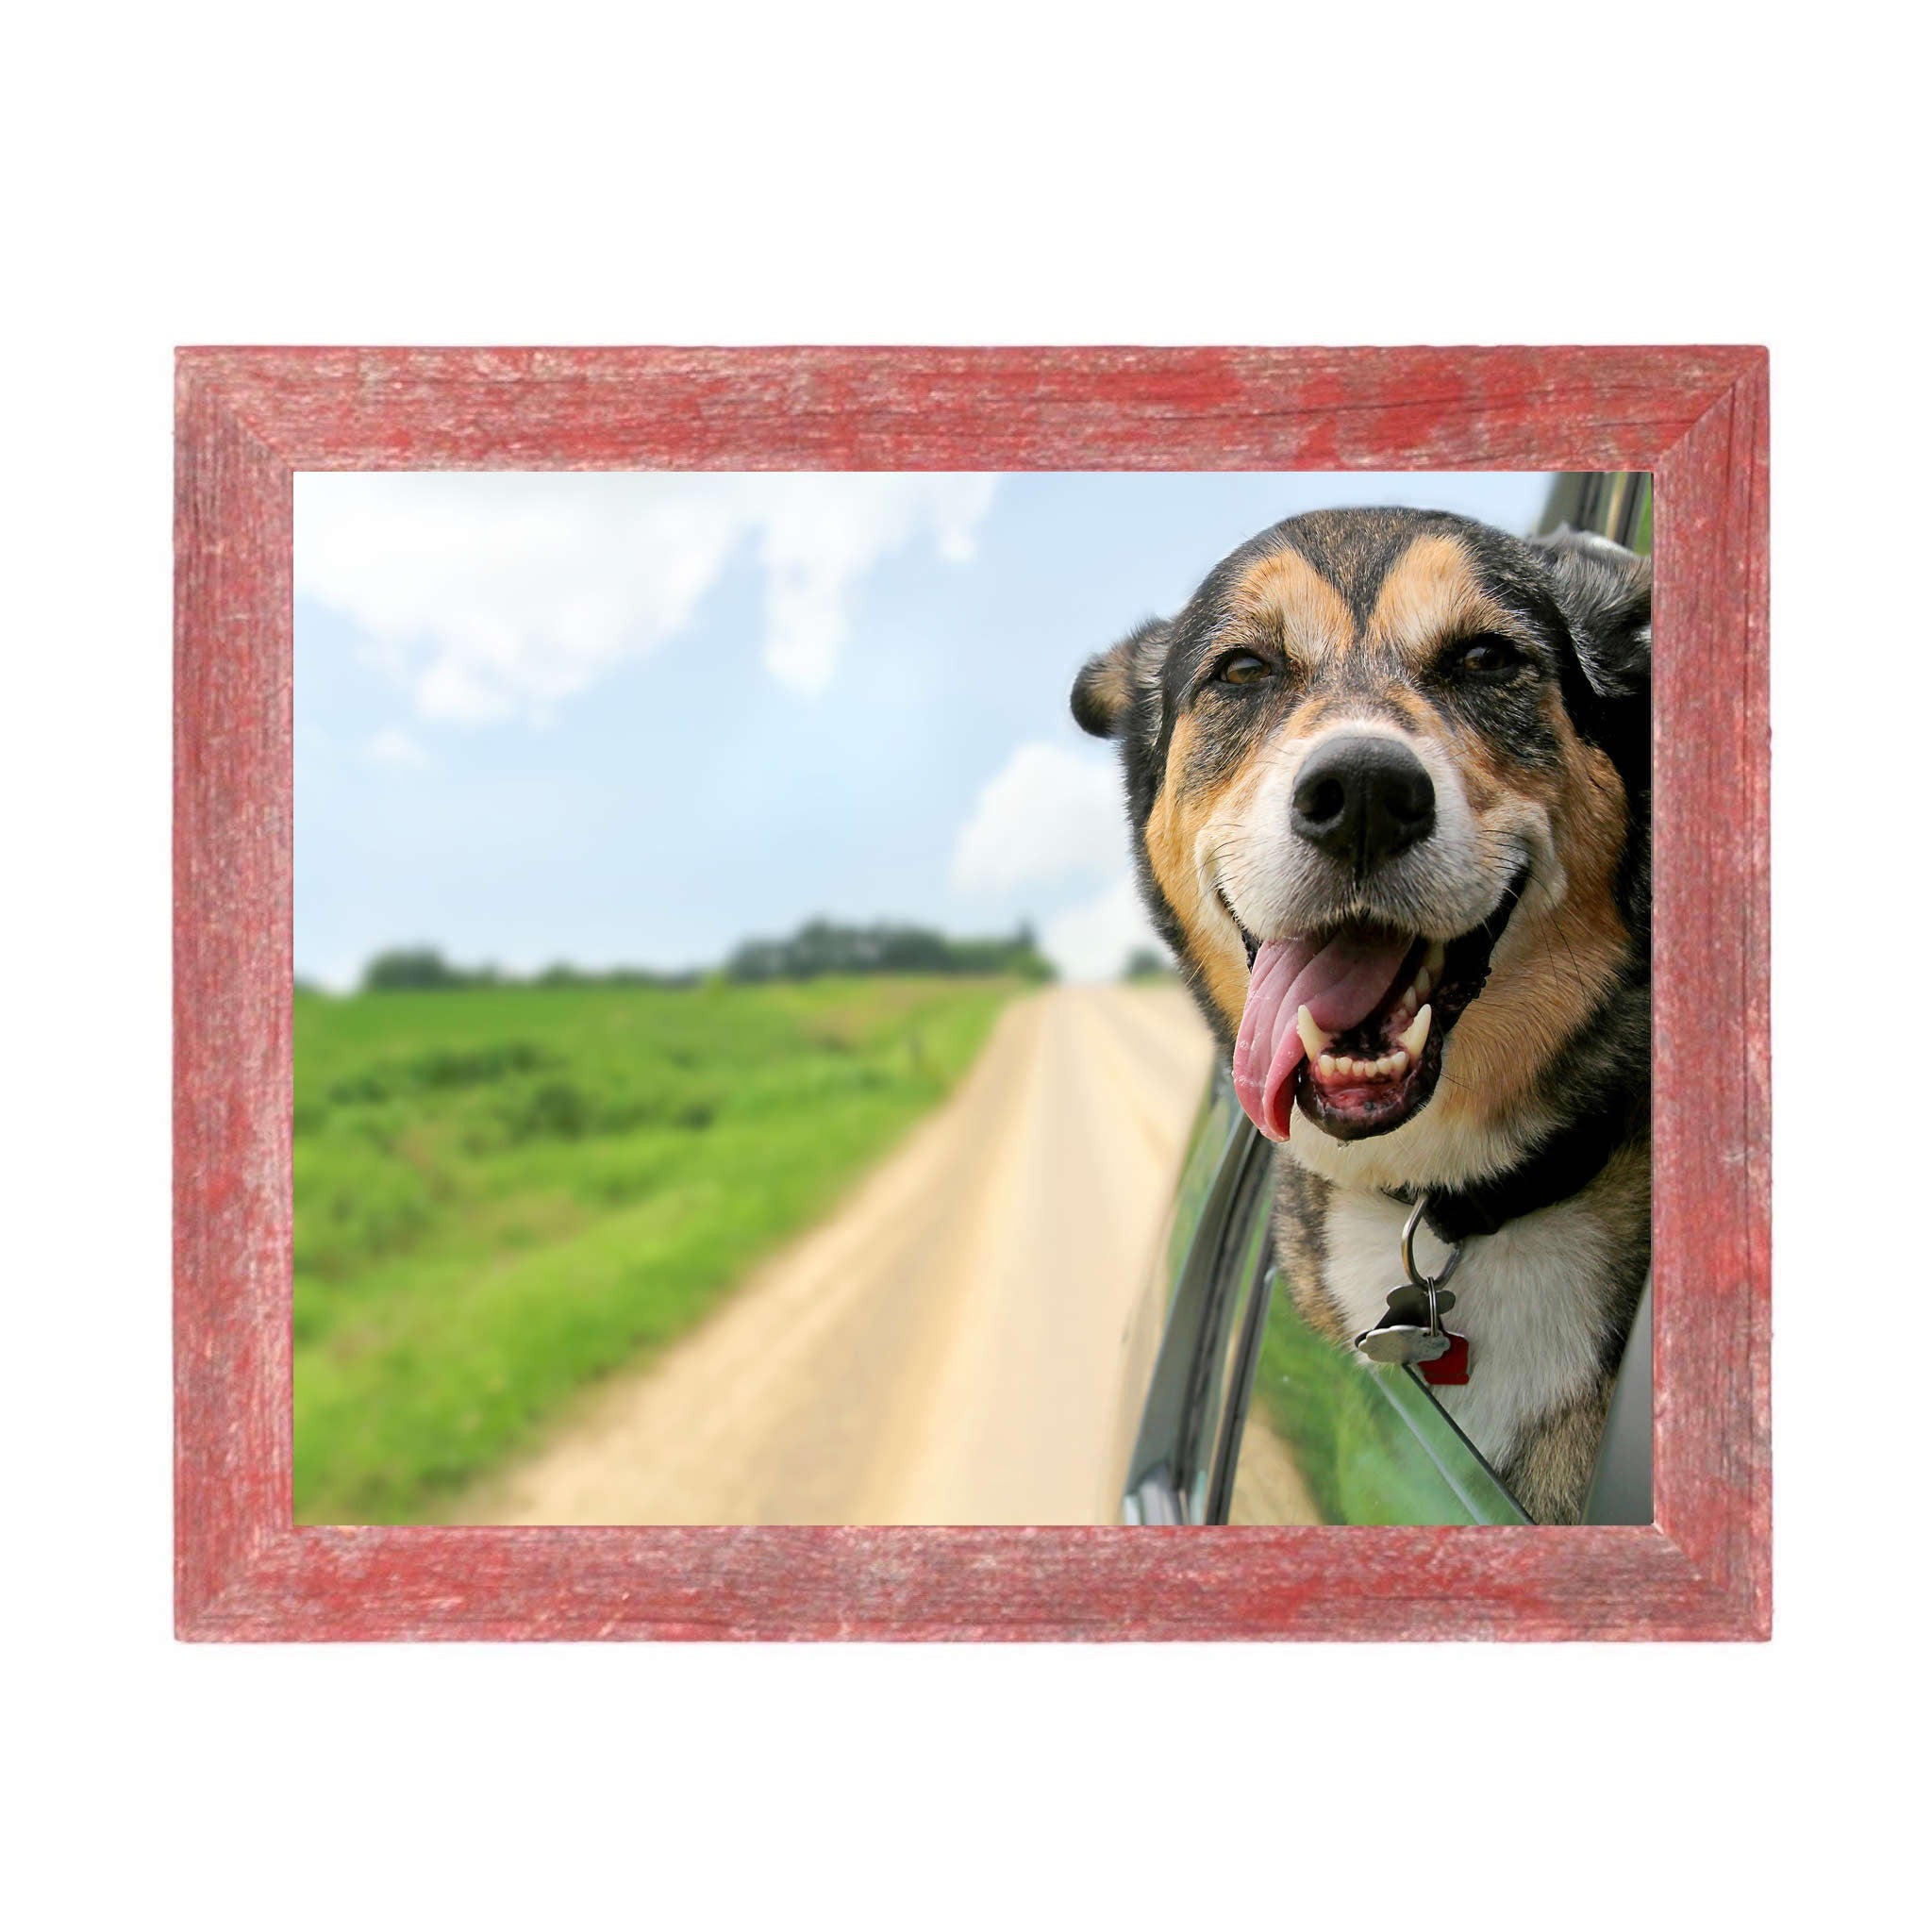 Rustic Farmhouse Red Wood Frame | 11